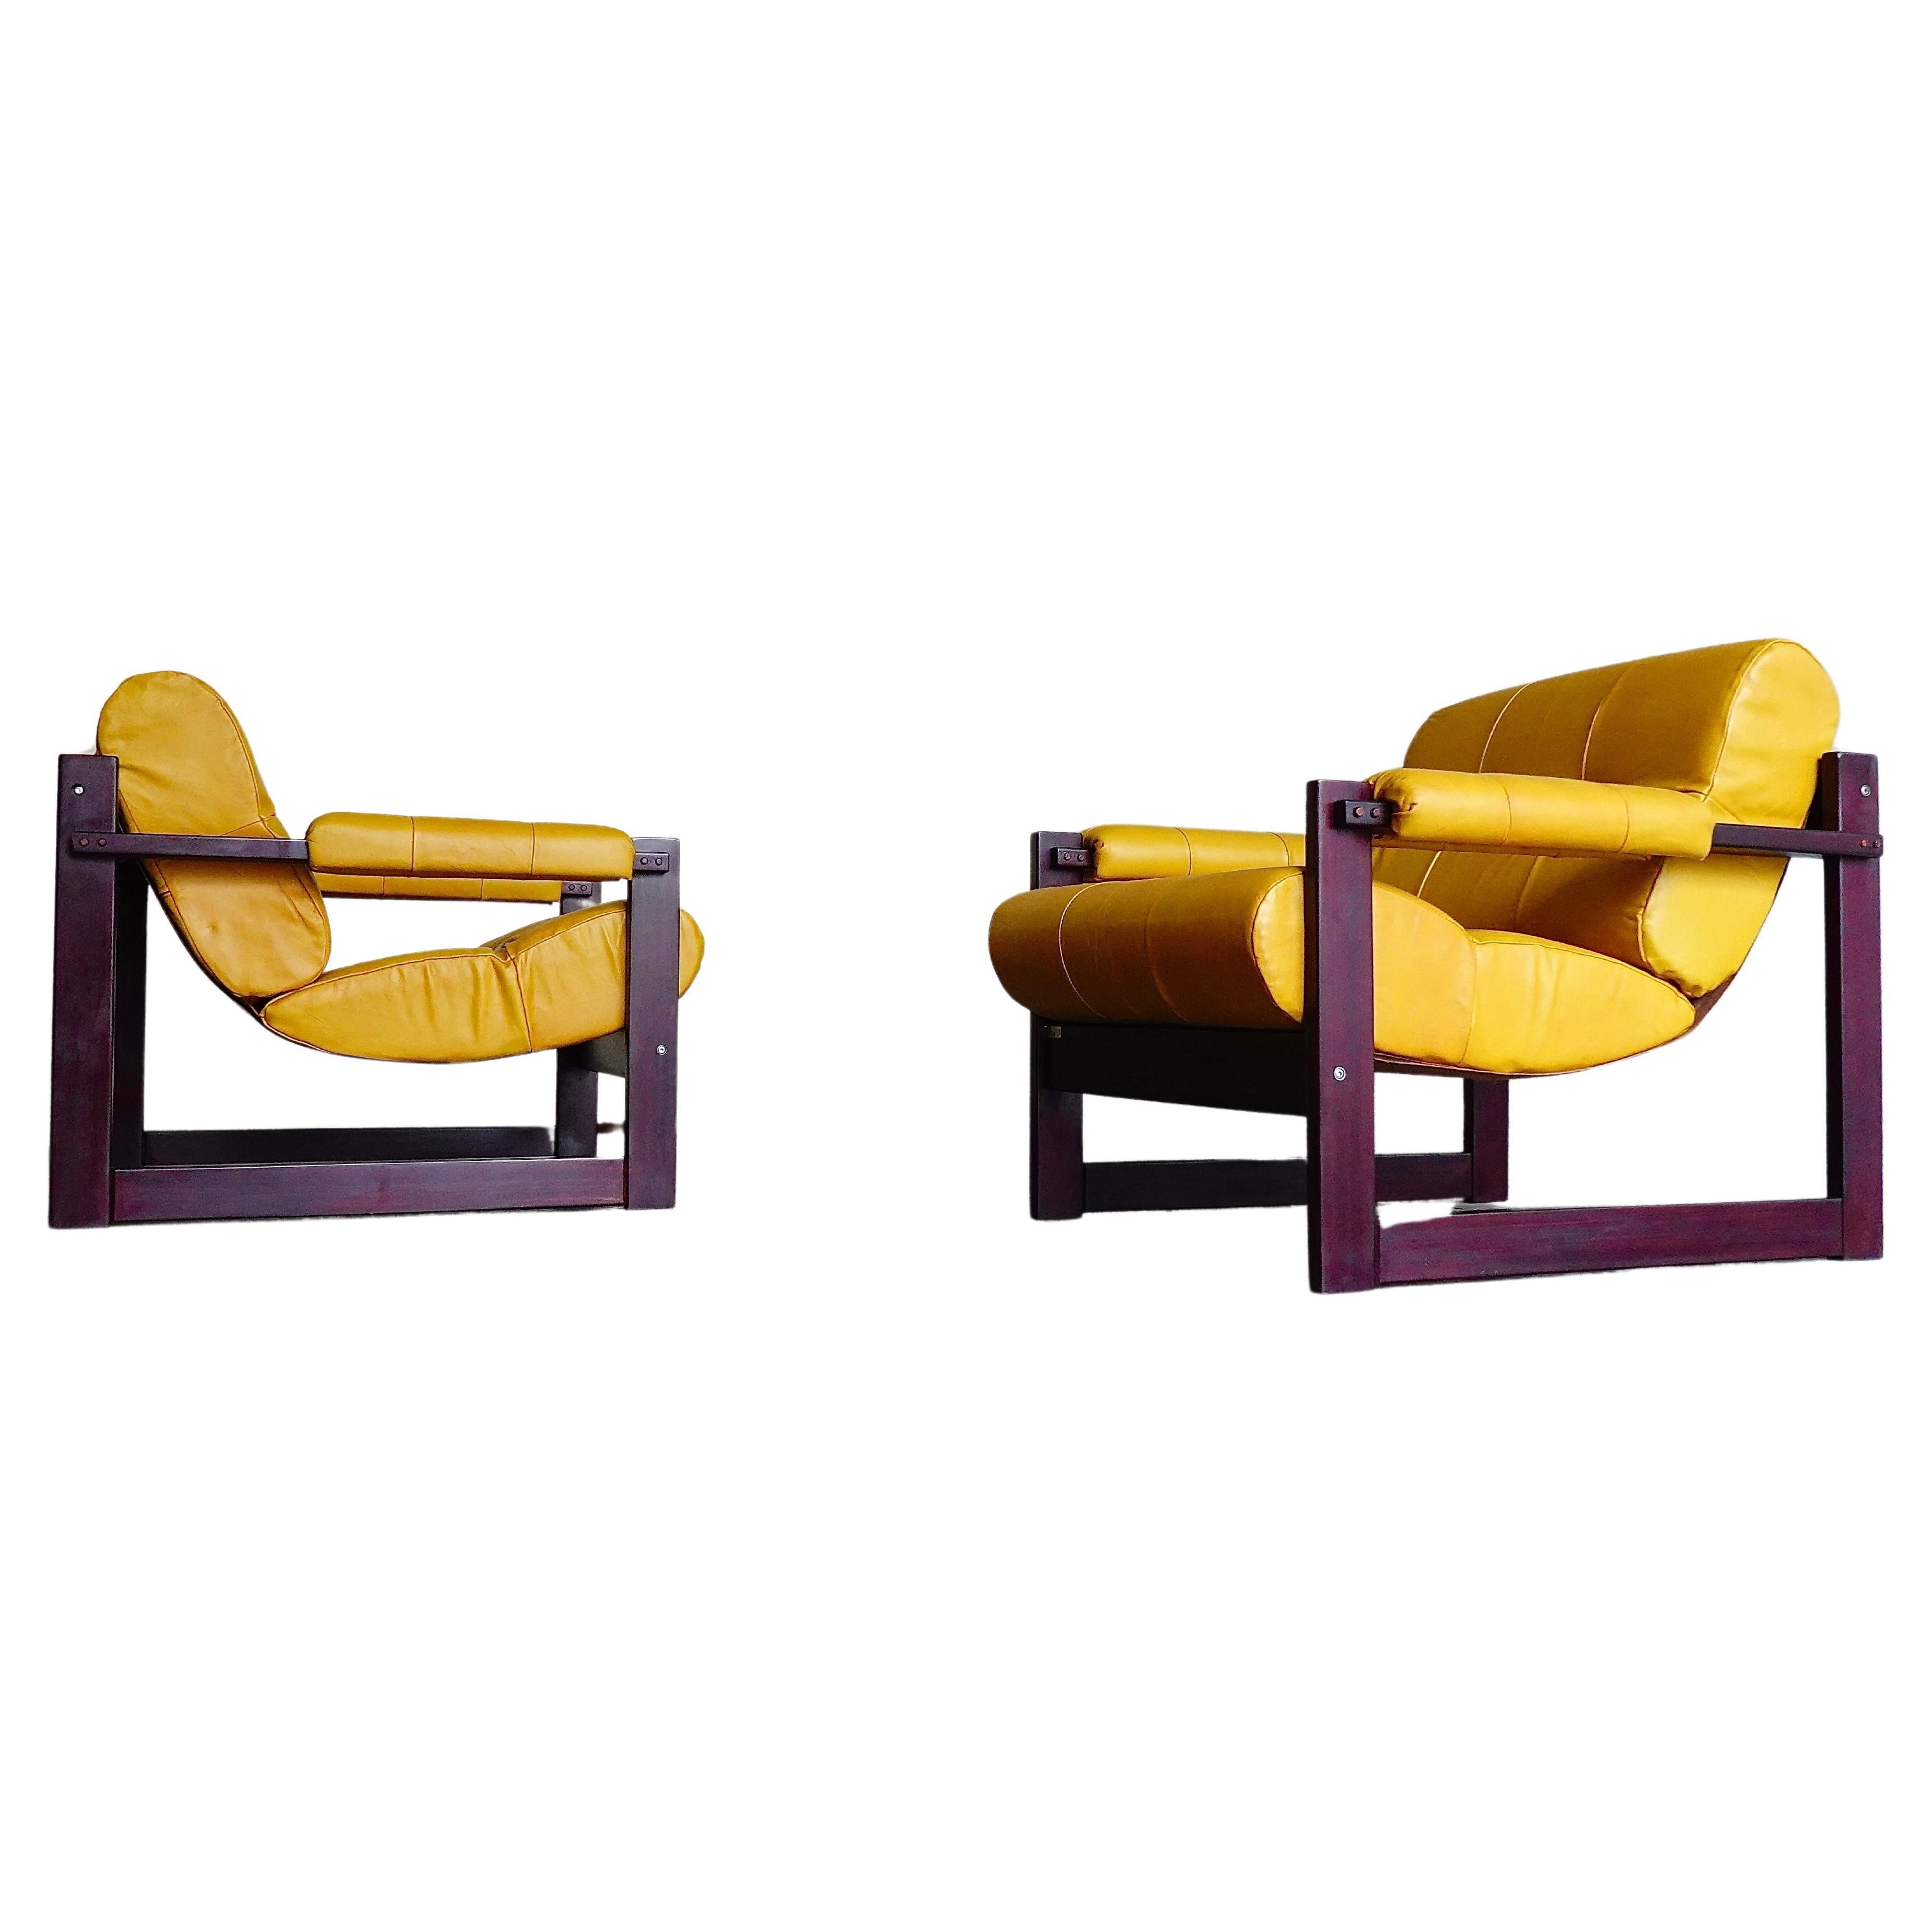 Pr. Percival Lafer MP-167 Lounge Chairs in Jatoba & Leather, 1970s